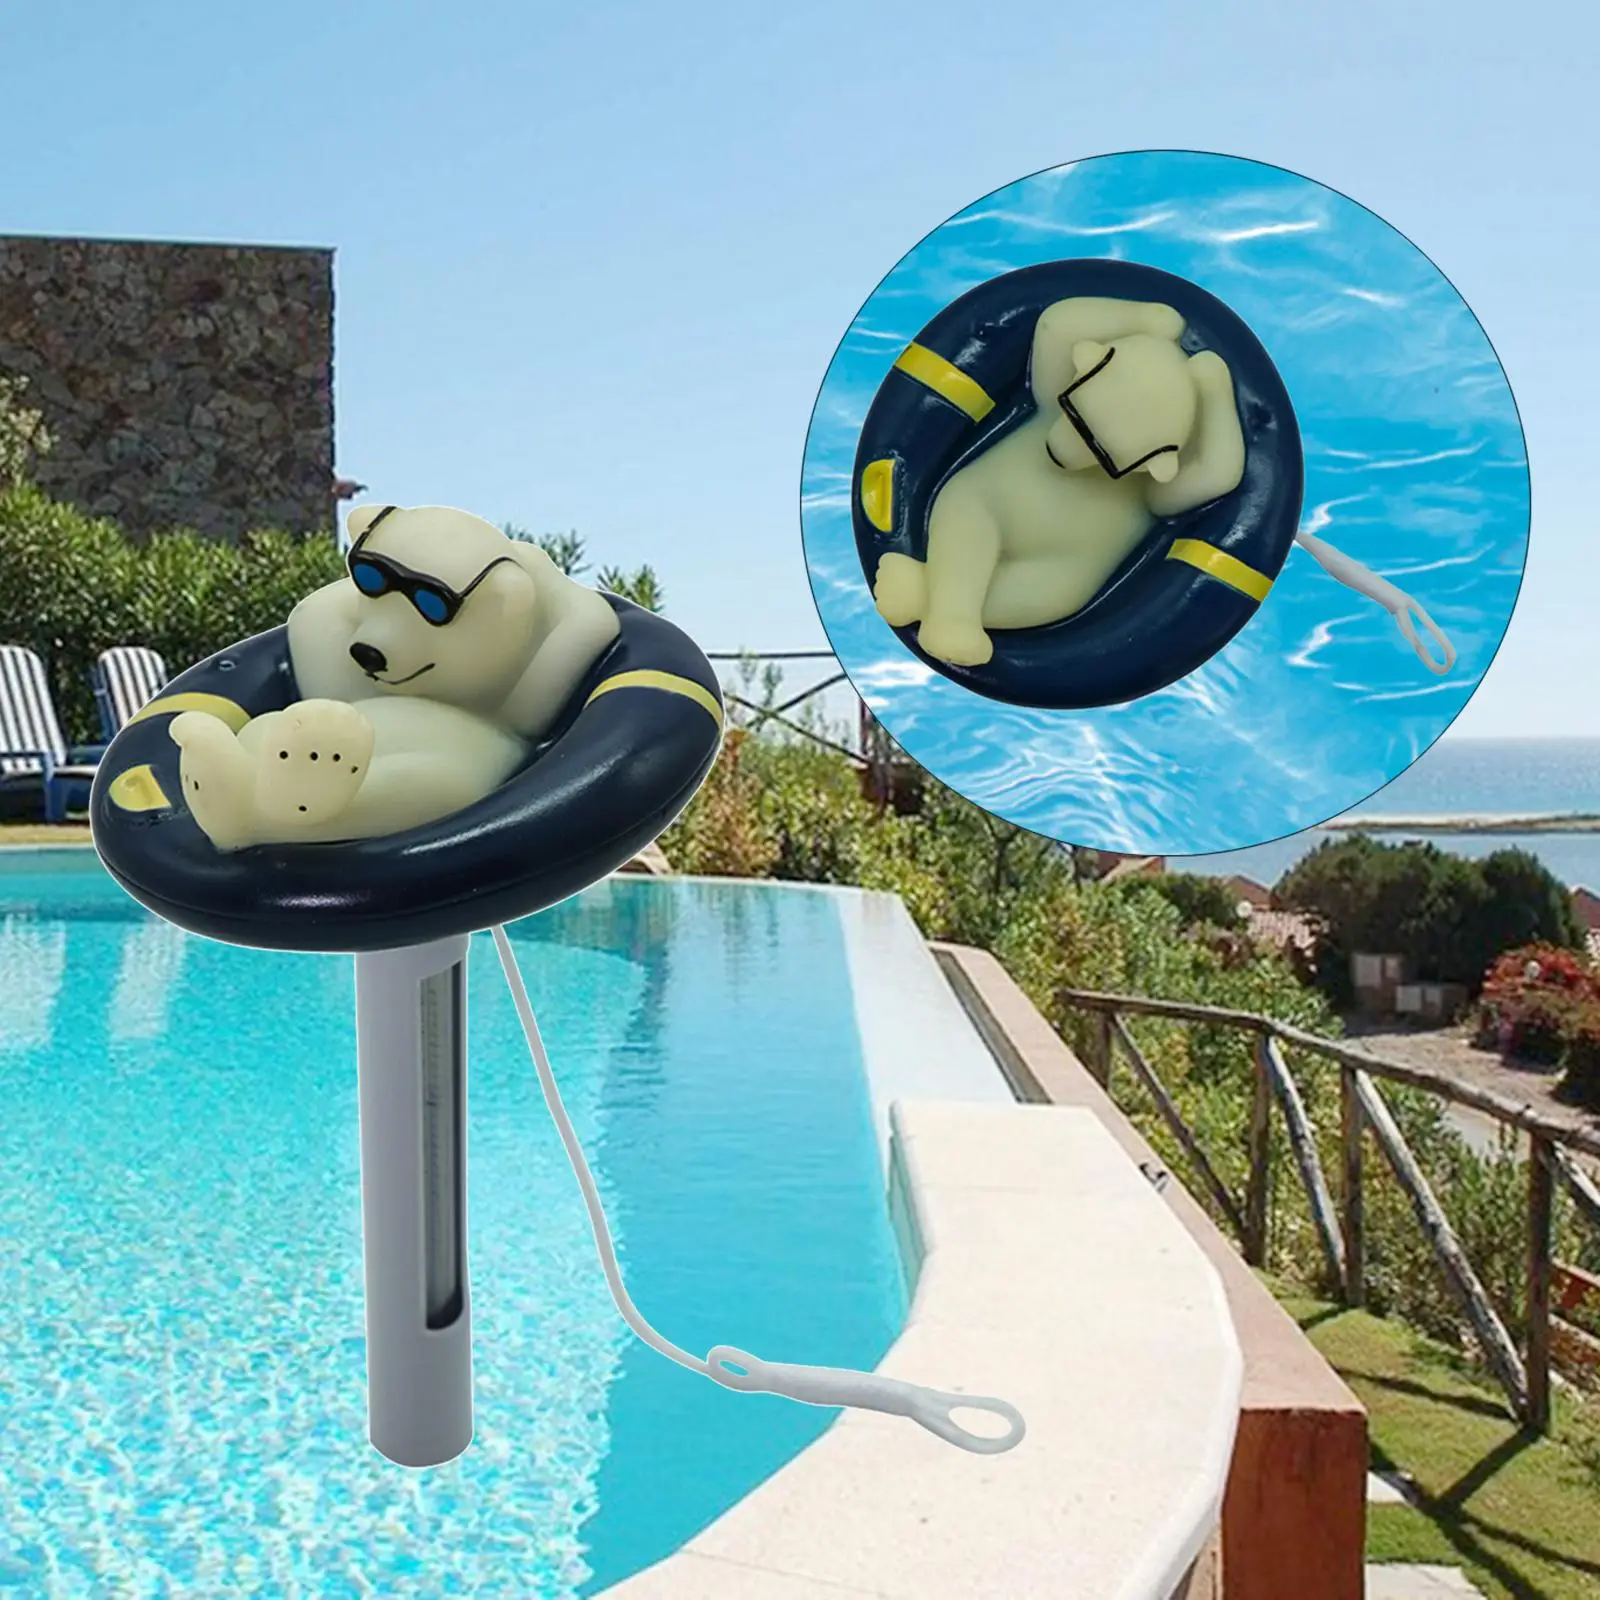 Polar Bear Swimming Pool Thermometer Measurement Tool Floating Bath Water Thermometer for Aquariums Baby Pool Hot Tubs Easy Read